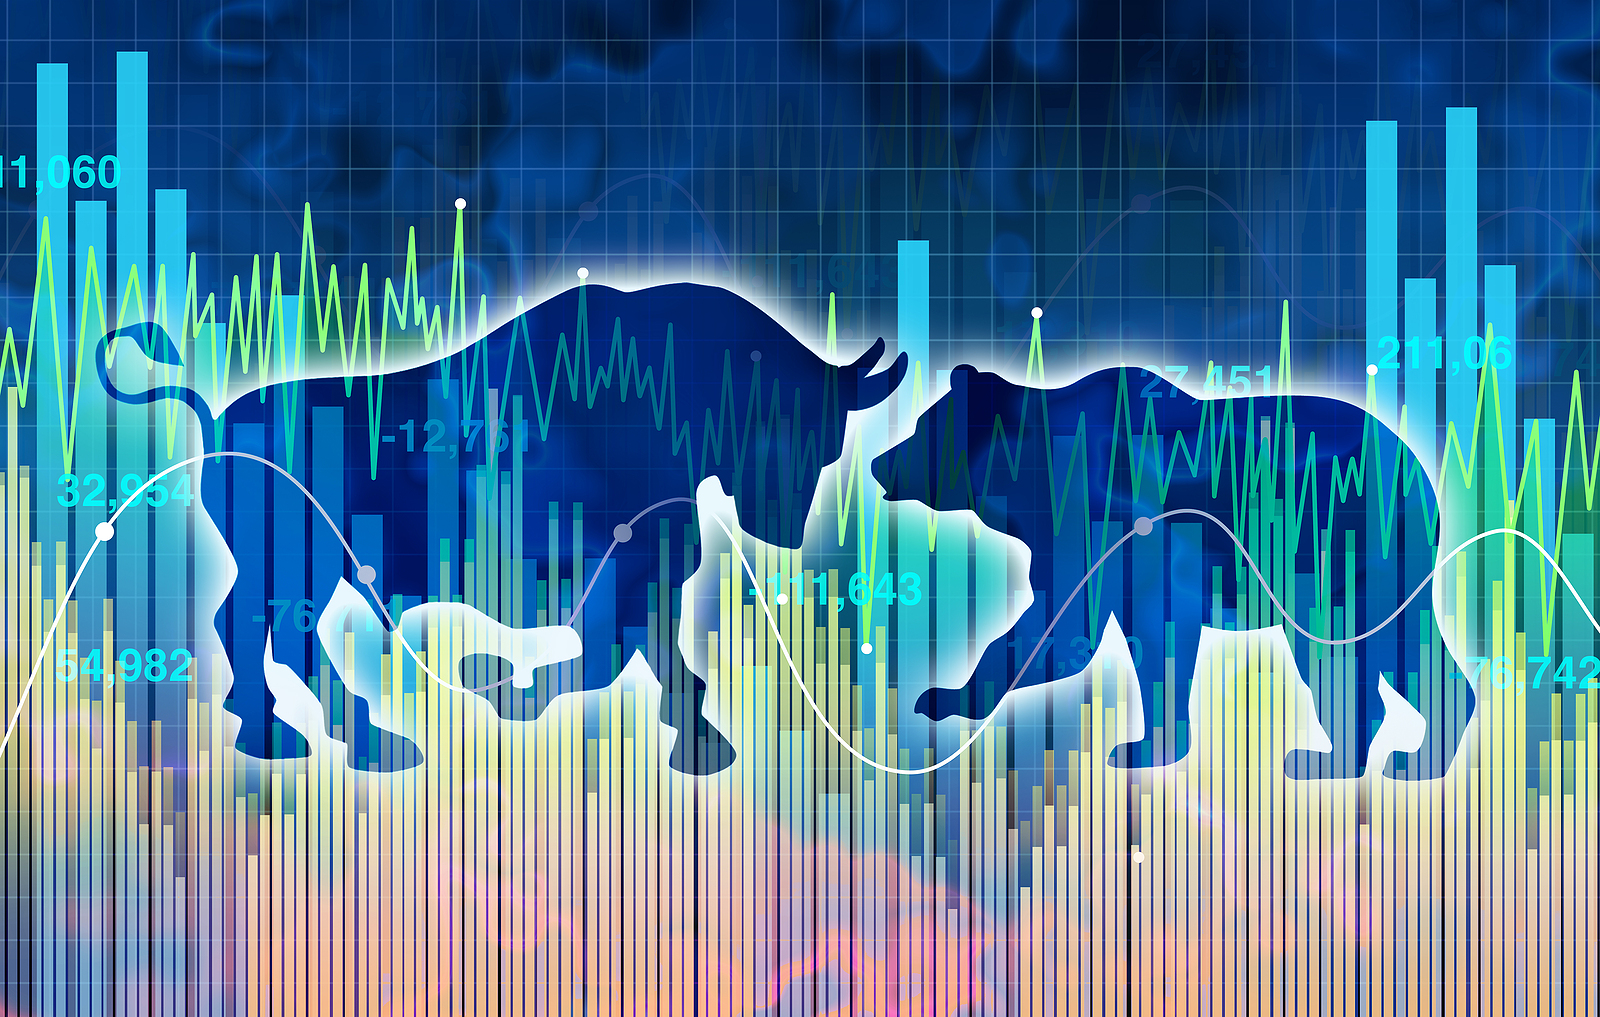 Today’s Stock Market News & Events: 4/30/2021